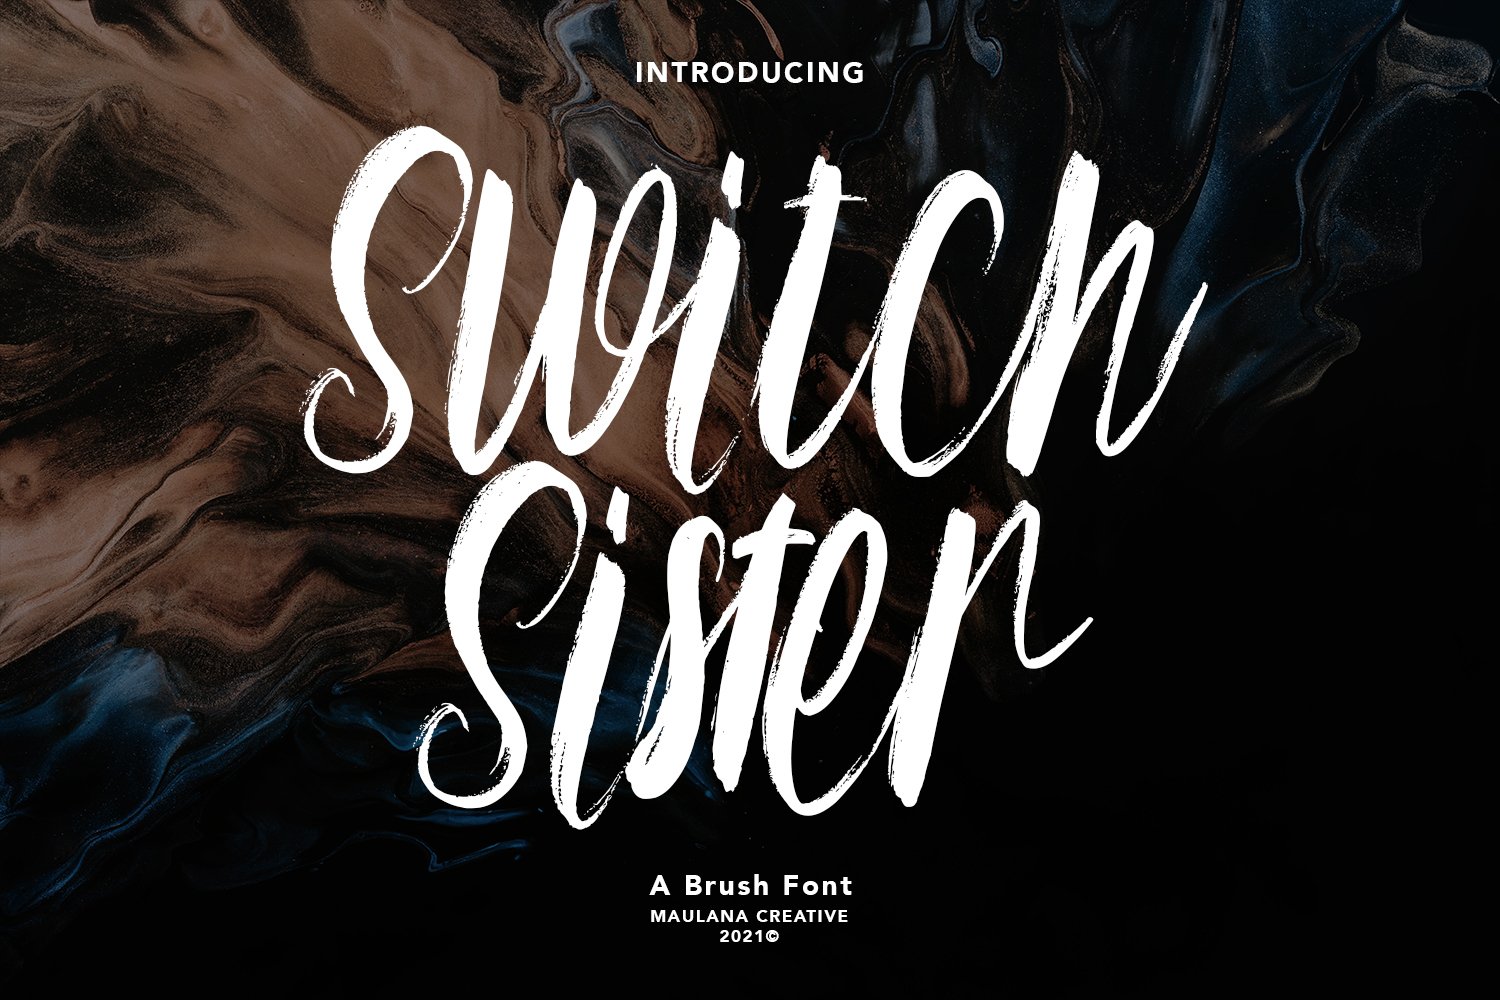 Switch Sister Brush Font cover image.